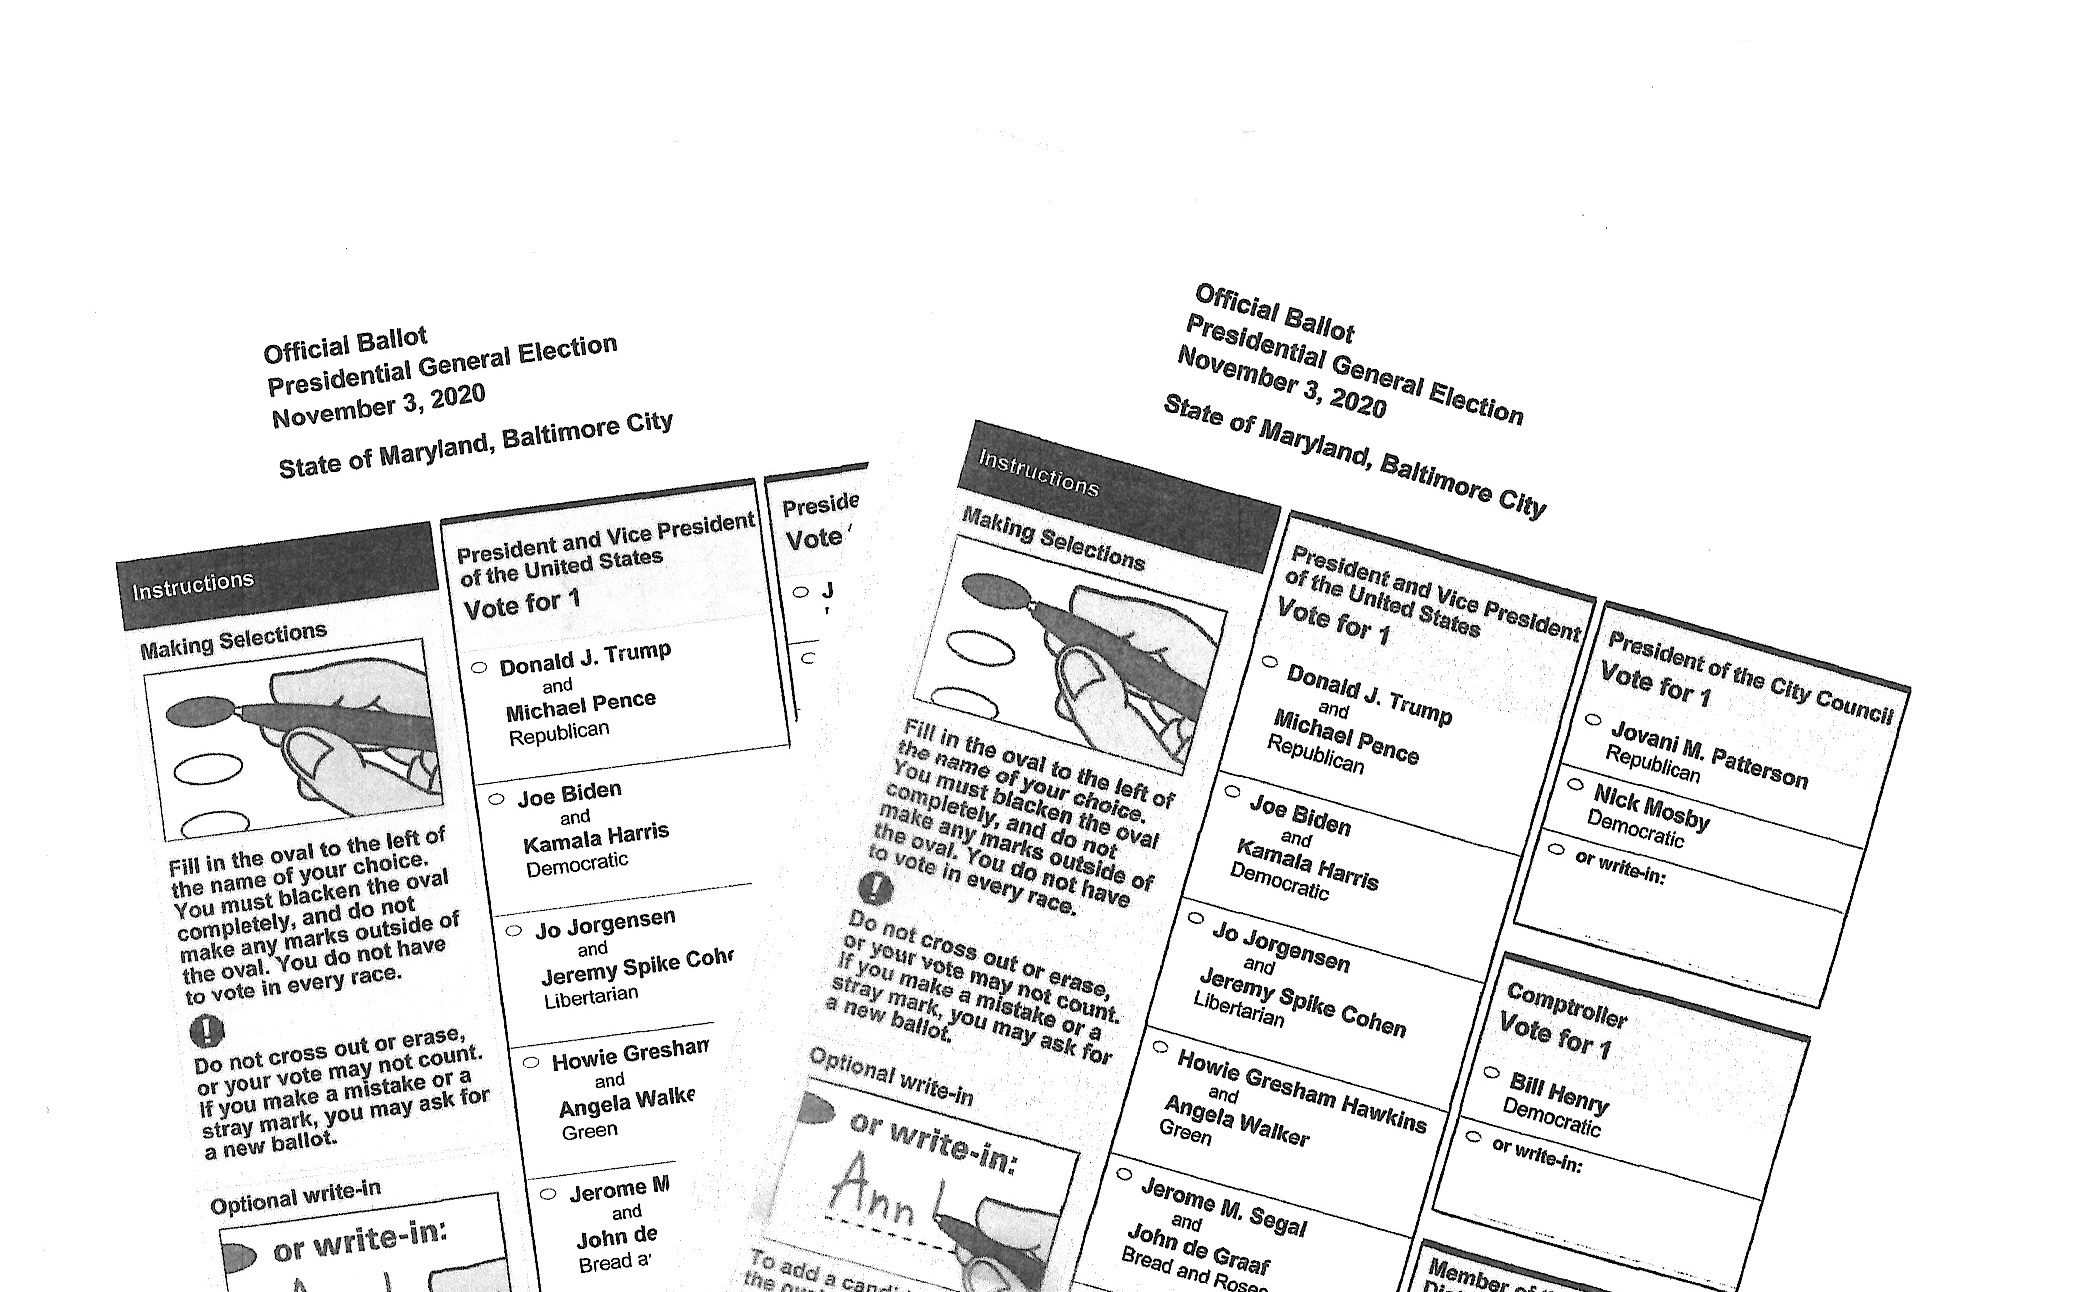 Sample ballots form the 2020 Maryland General Election credit Anthony C. Hayes